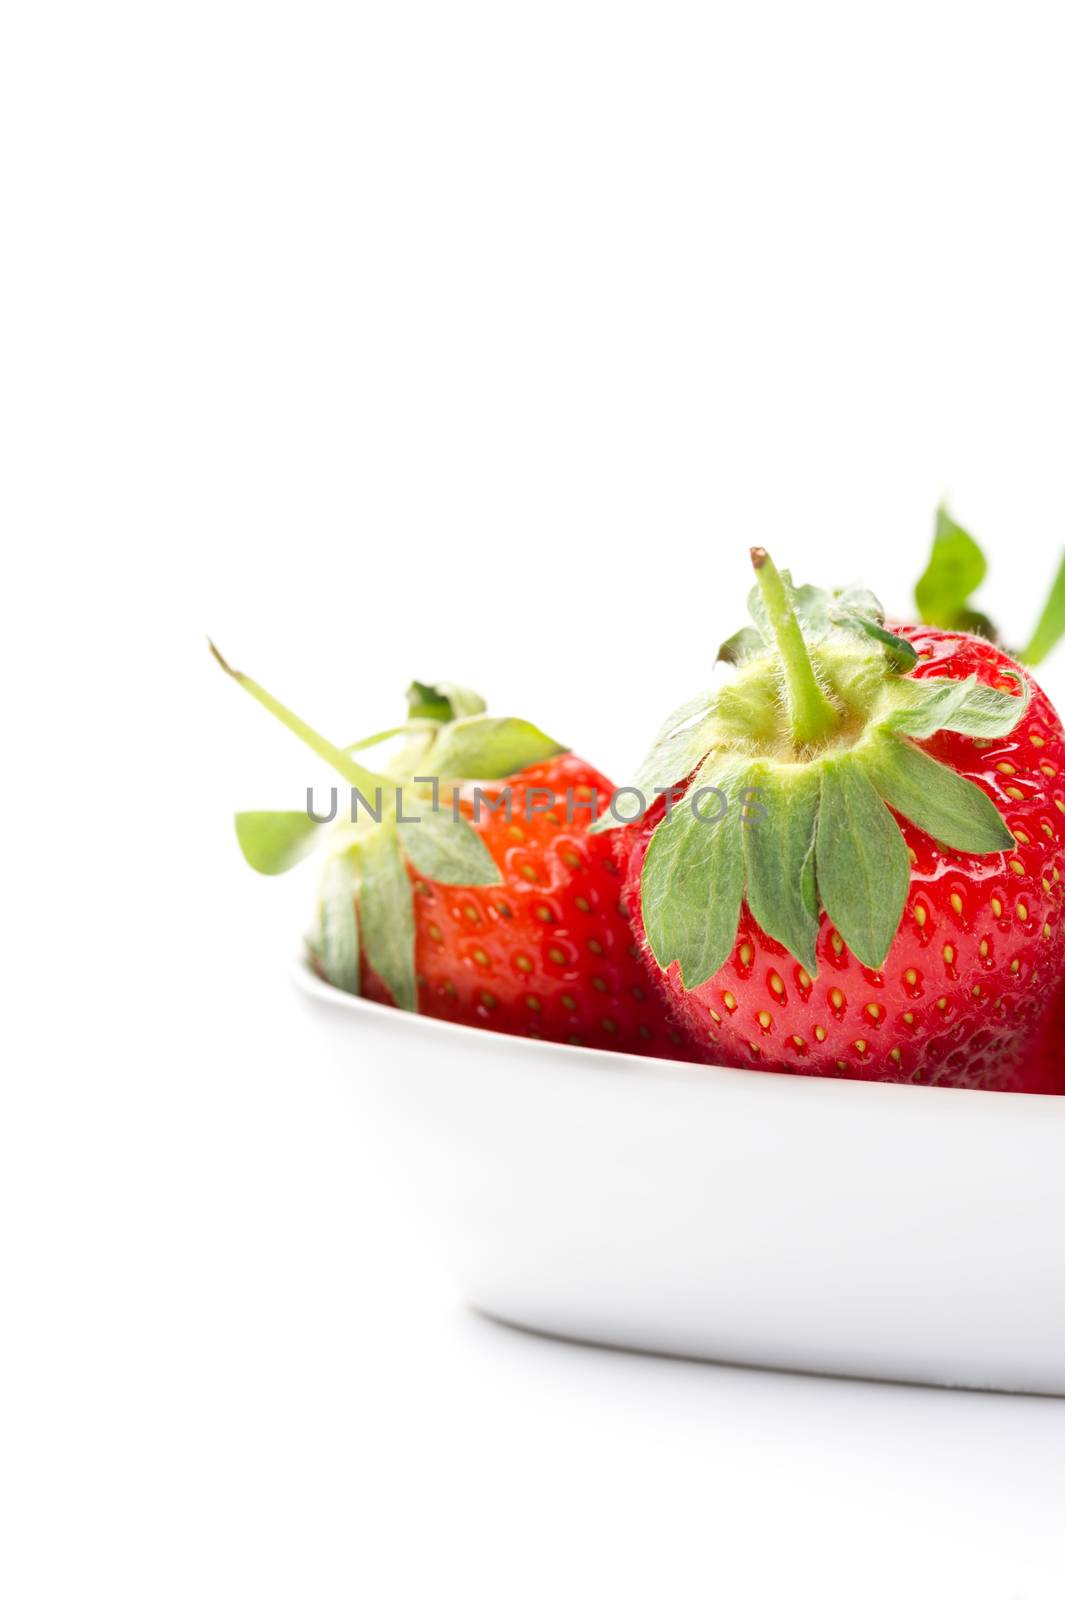 Juicy ripe red whole fresh home grown strawberries in a plain white ceramic bowl with attached green stalks for a healthy finger food snack or cooking and baking ingredient, copyspace on white